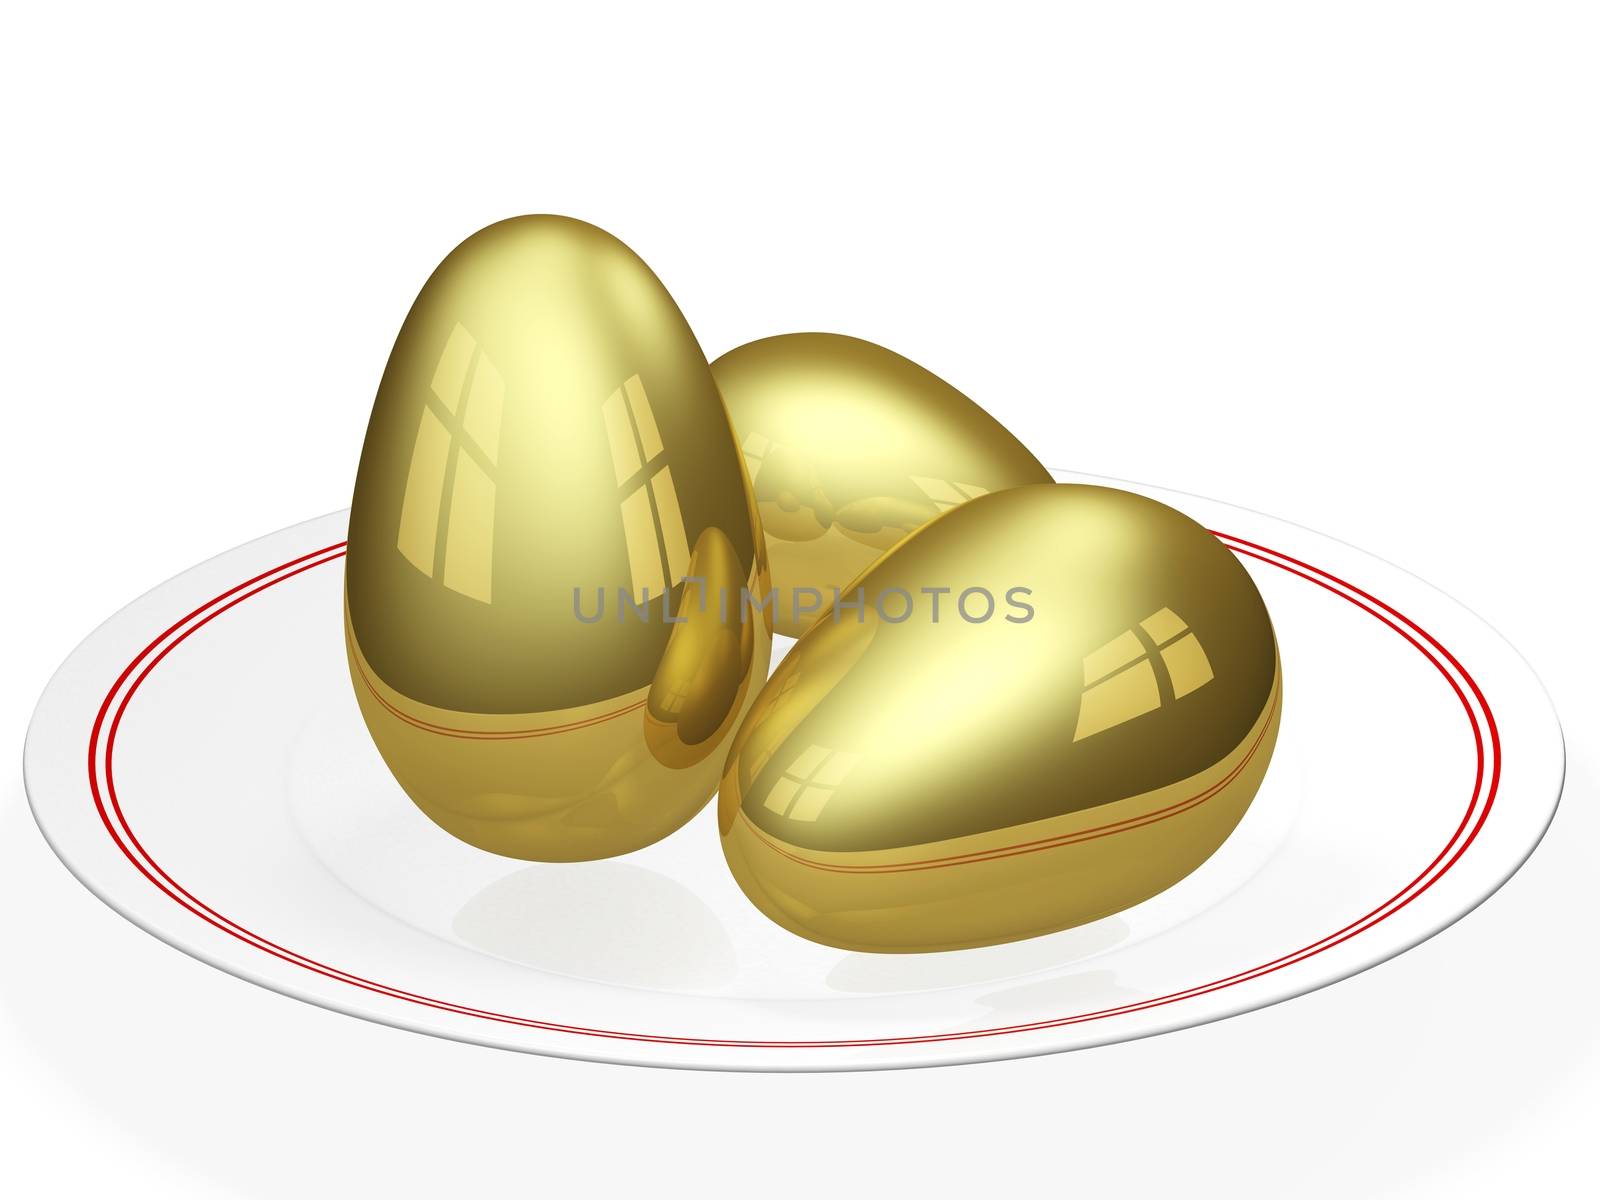 Golden Eggs in a Ceramic Plate by RichieThakur